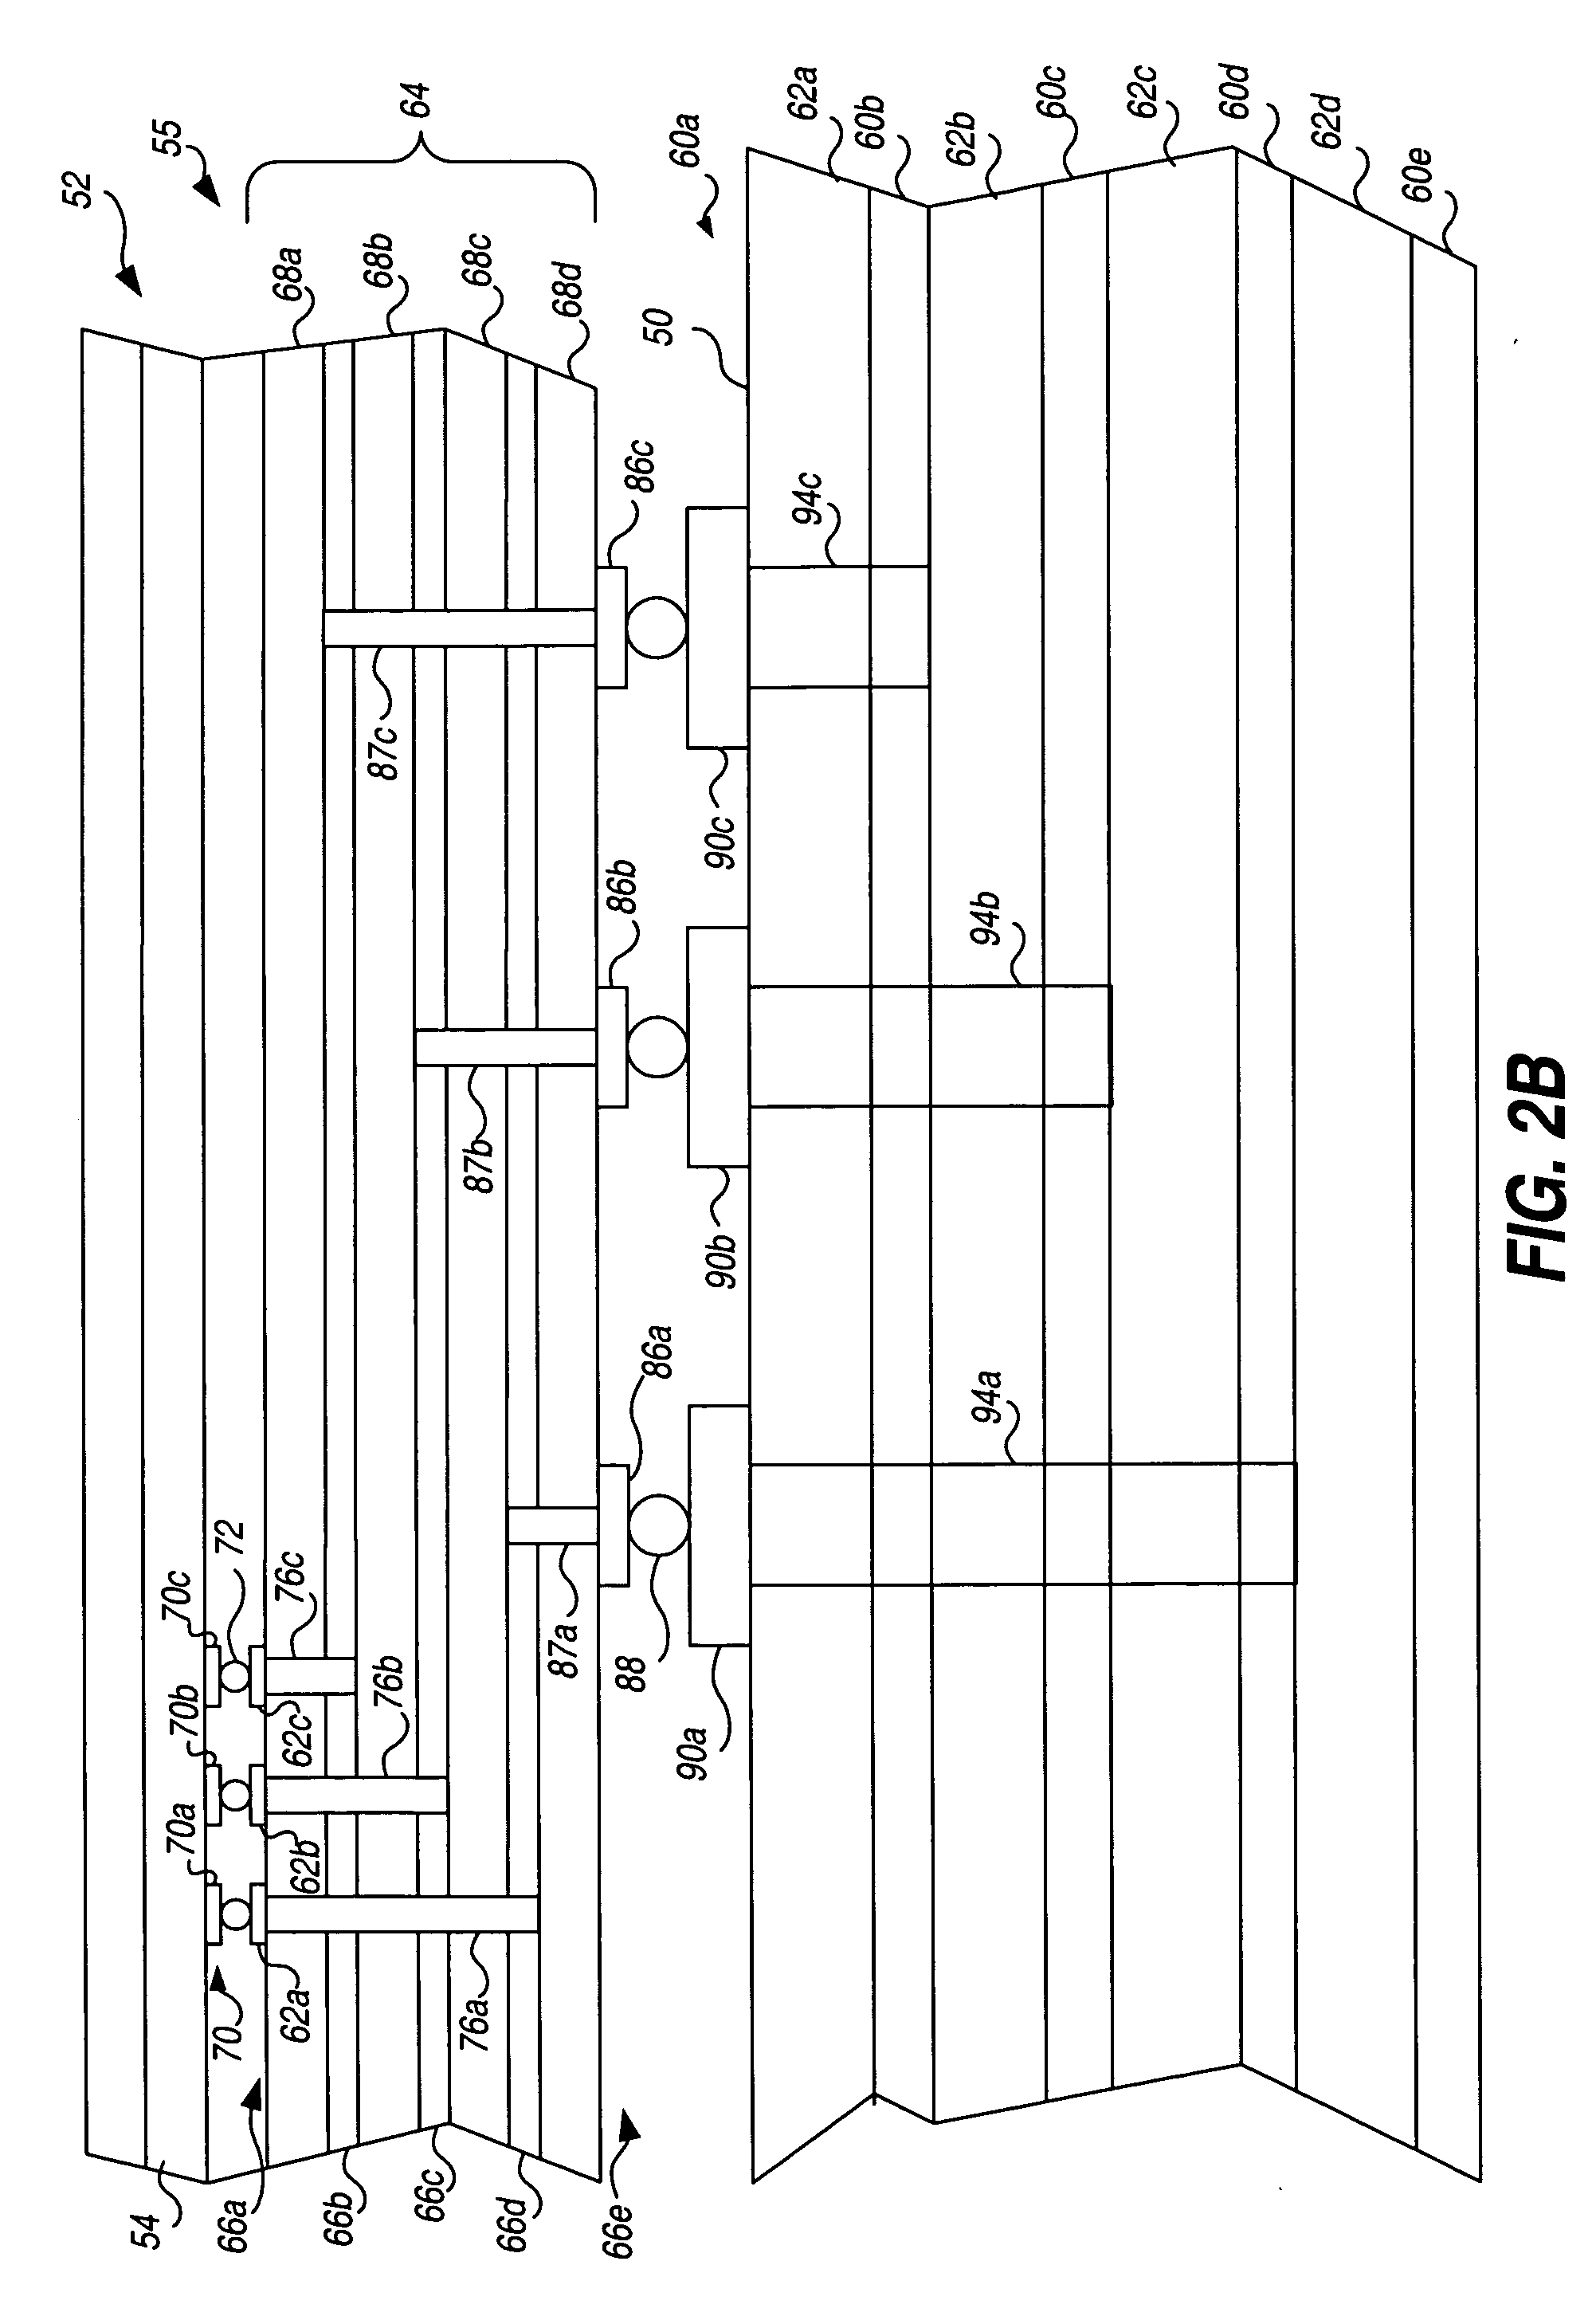 Redistribution metal for output driver slew rate control